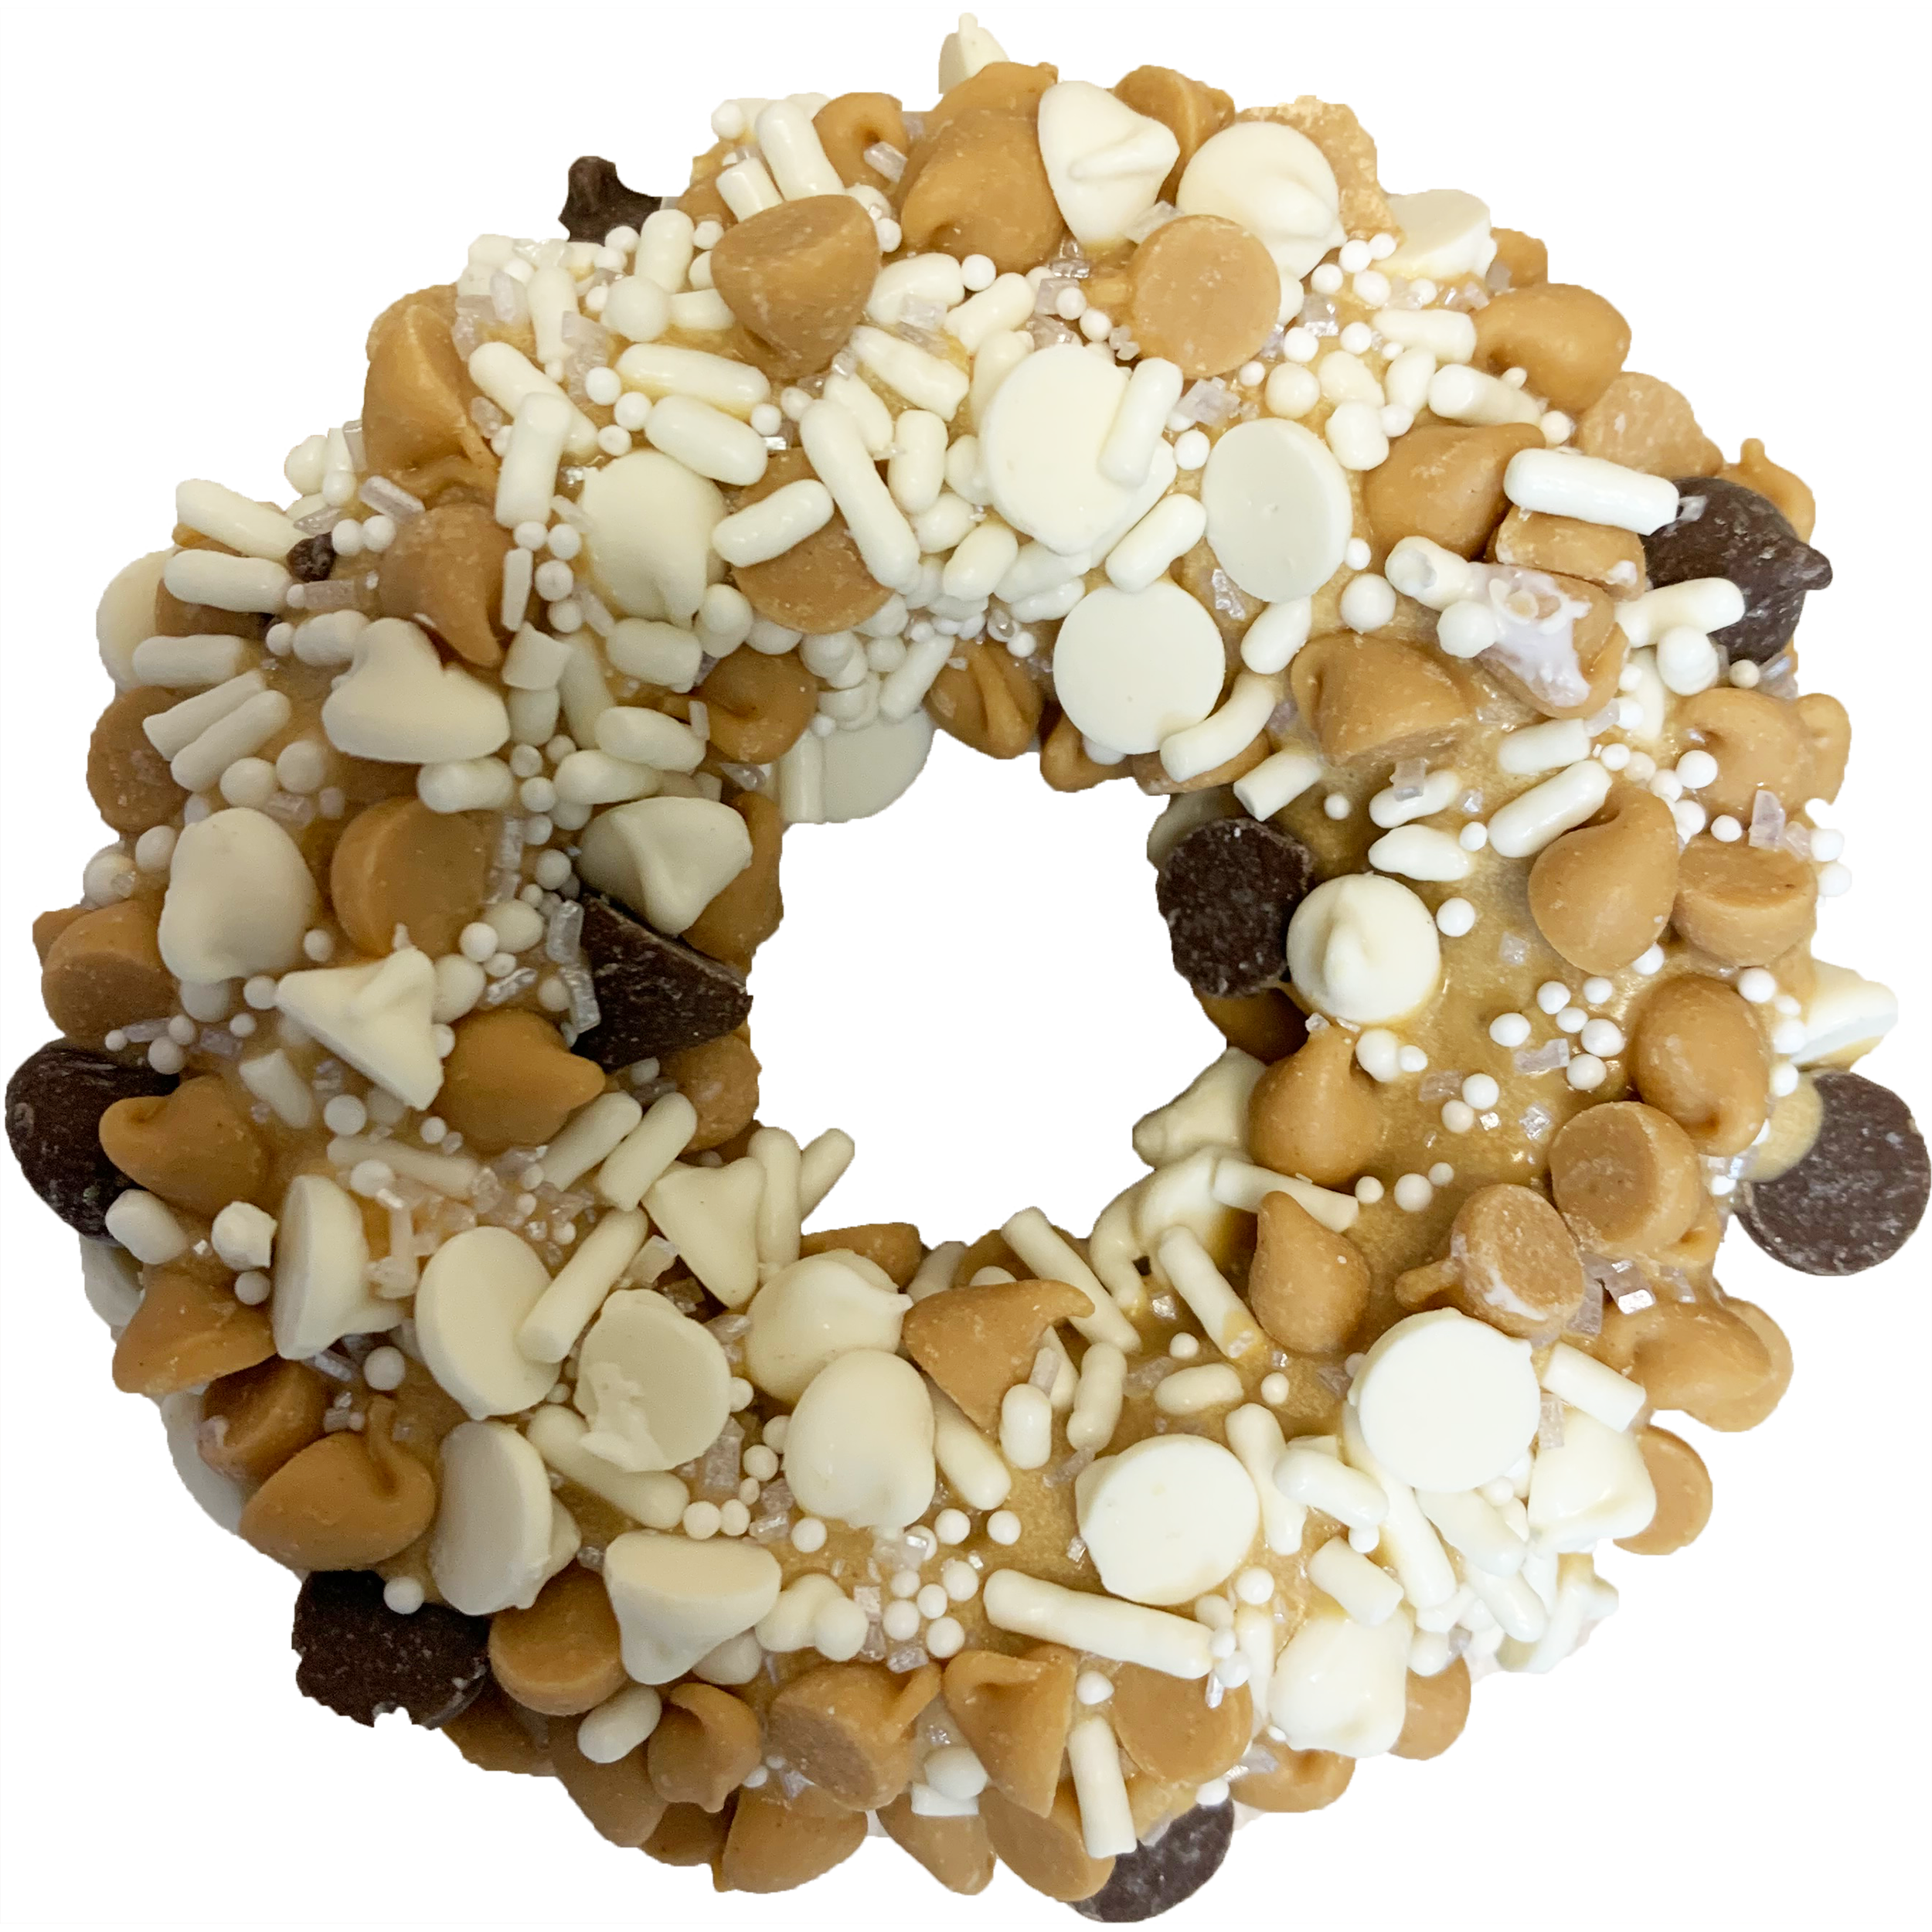 K9 Granola Factory Donut Shop Gourmet Donut For Dogs, Peanut Butter Cup Blizzard